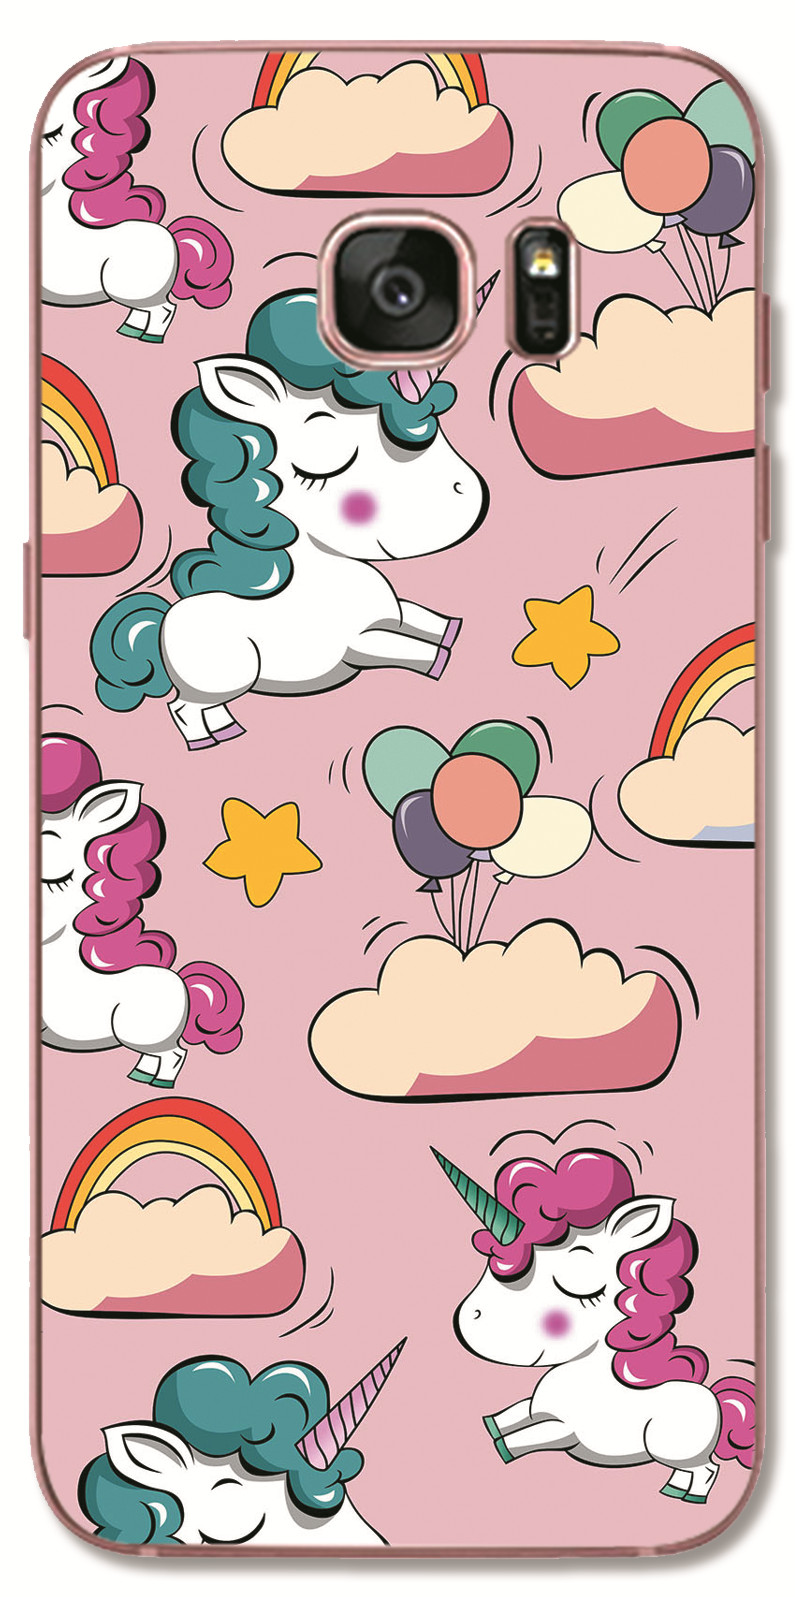 Samsung Galaxy S8 Plus / Note 4 5 3 2 N7100 N9000 INS Cute Cartoon unicorn Soft Silicone TPU Phone Casing Lovely Strawberry Rabbit Graffiti Case Back Cover Couple